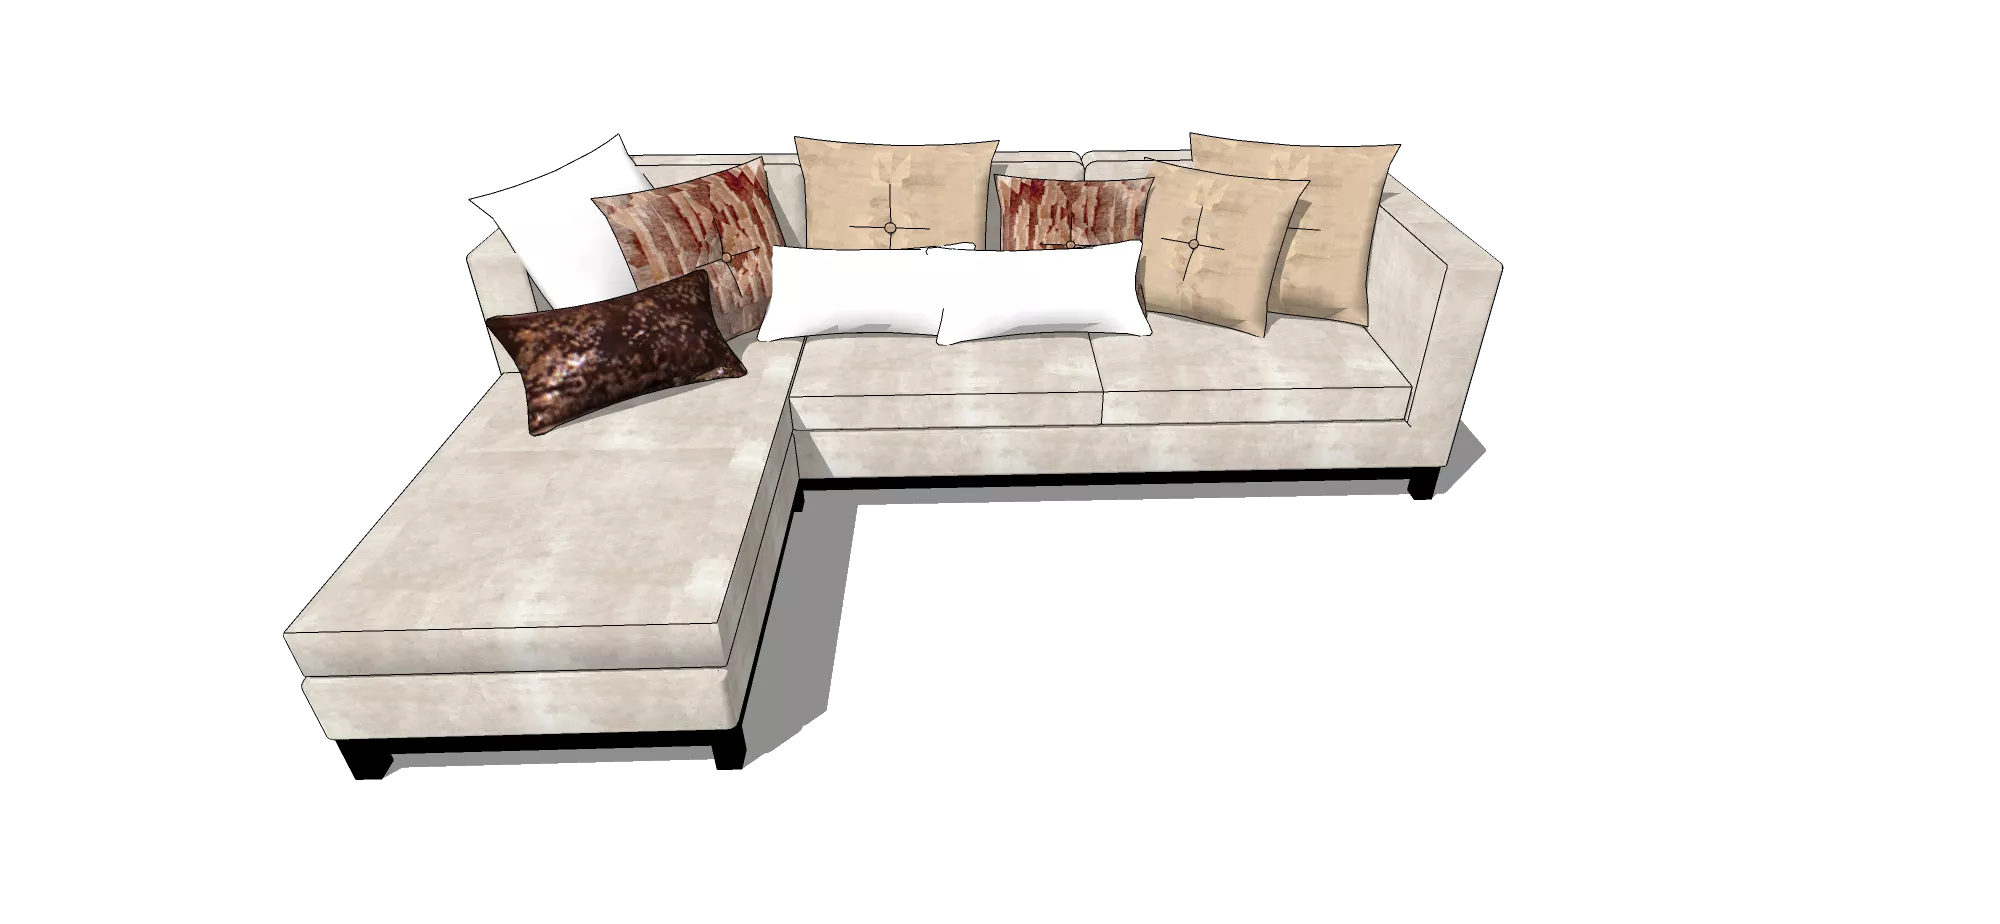 MODERN SOFA - SKETCHUP 3D MODEL - VRAY OR ENSCAPE - ID13073